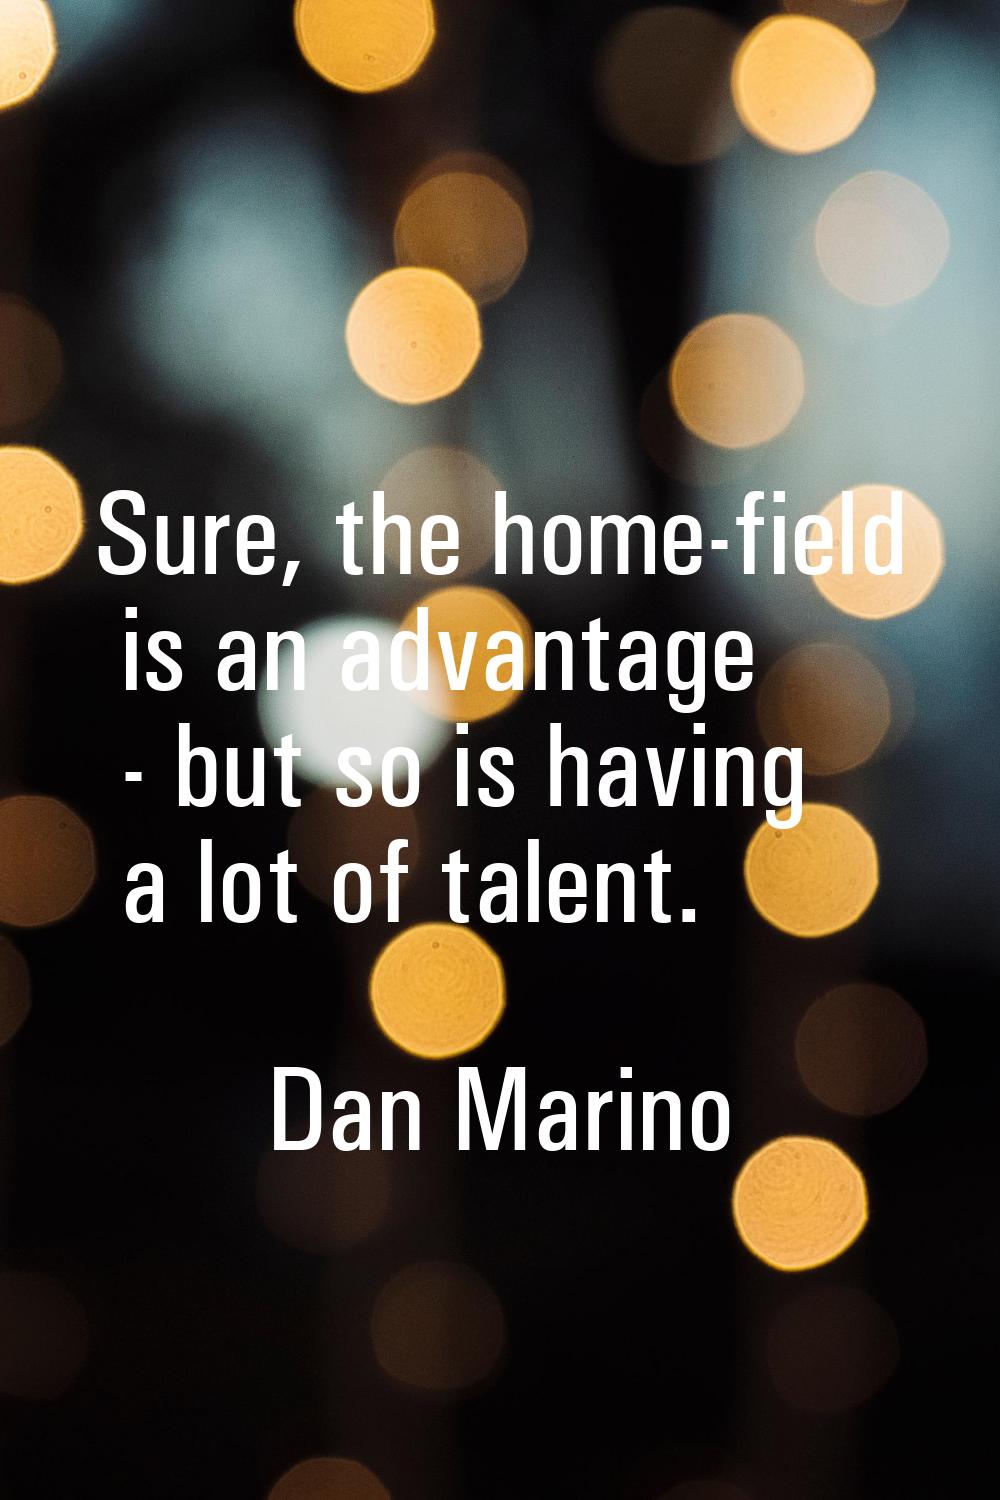 Sure, the home-field is an advantage - but so is having a lot of talent.